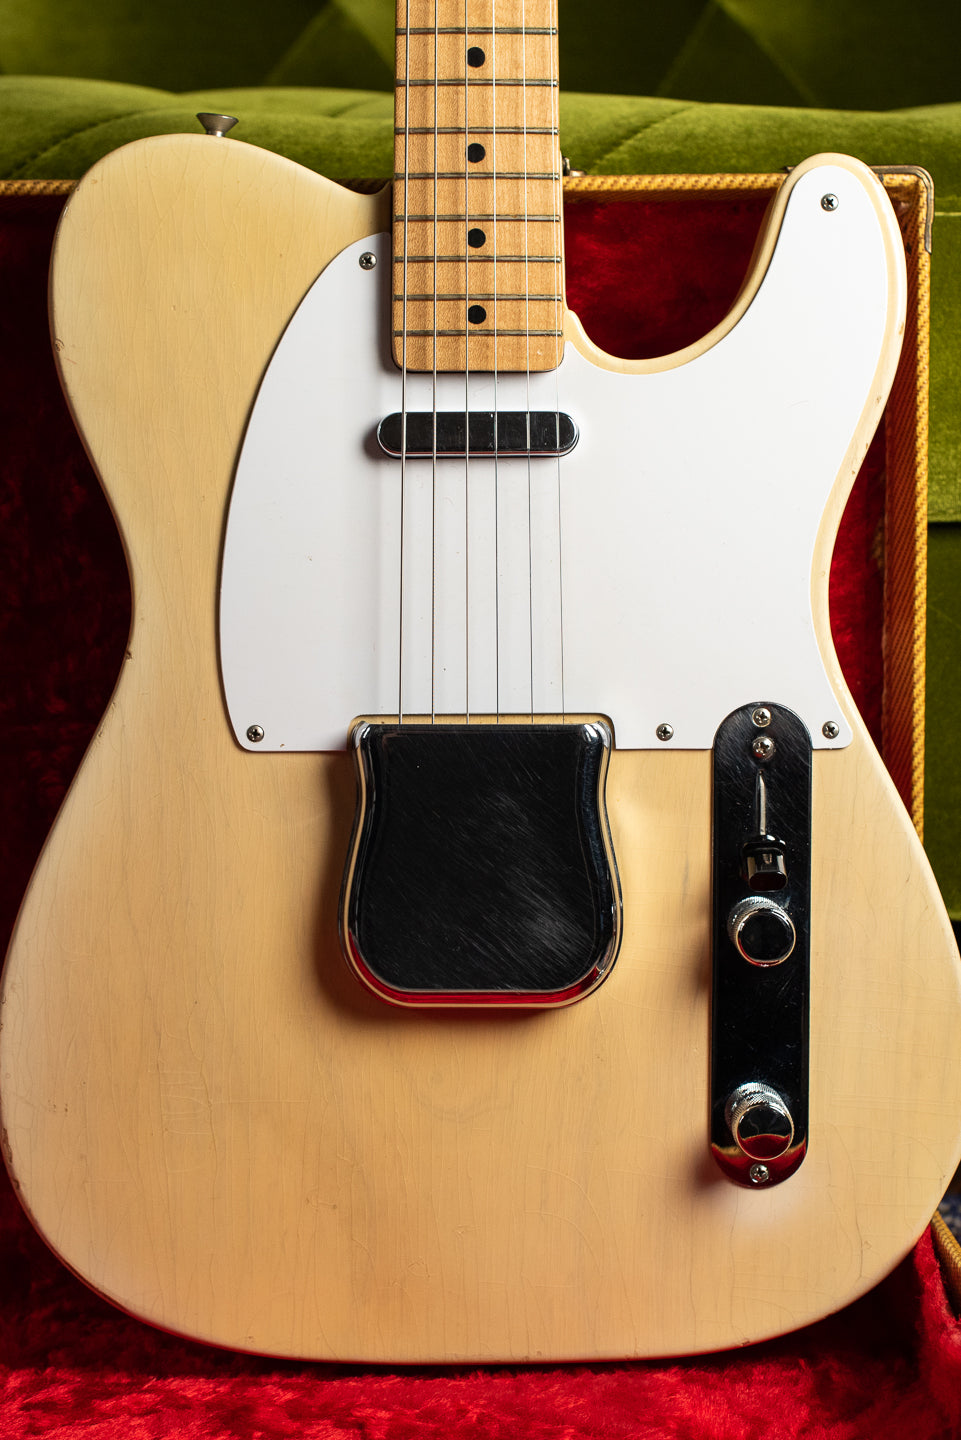 1957 Fender Telecaster Blond body with bridge cover